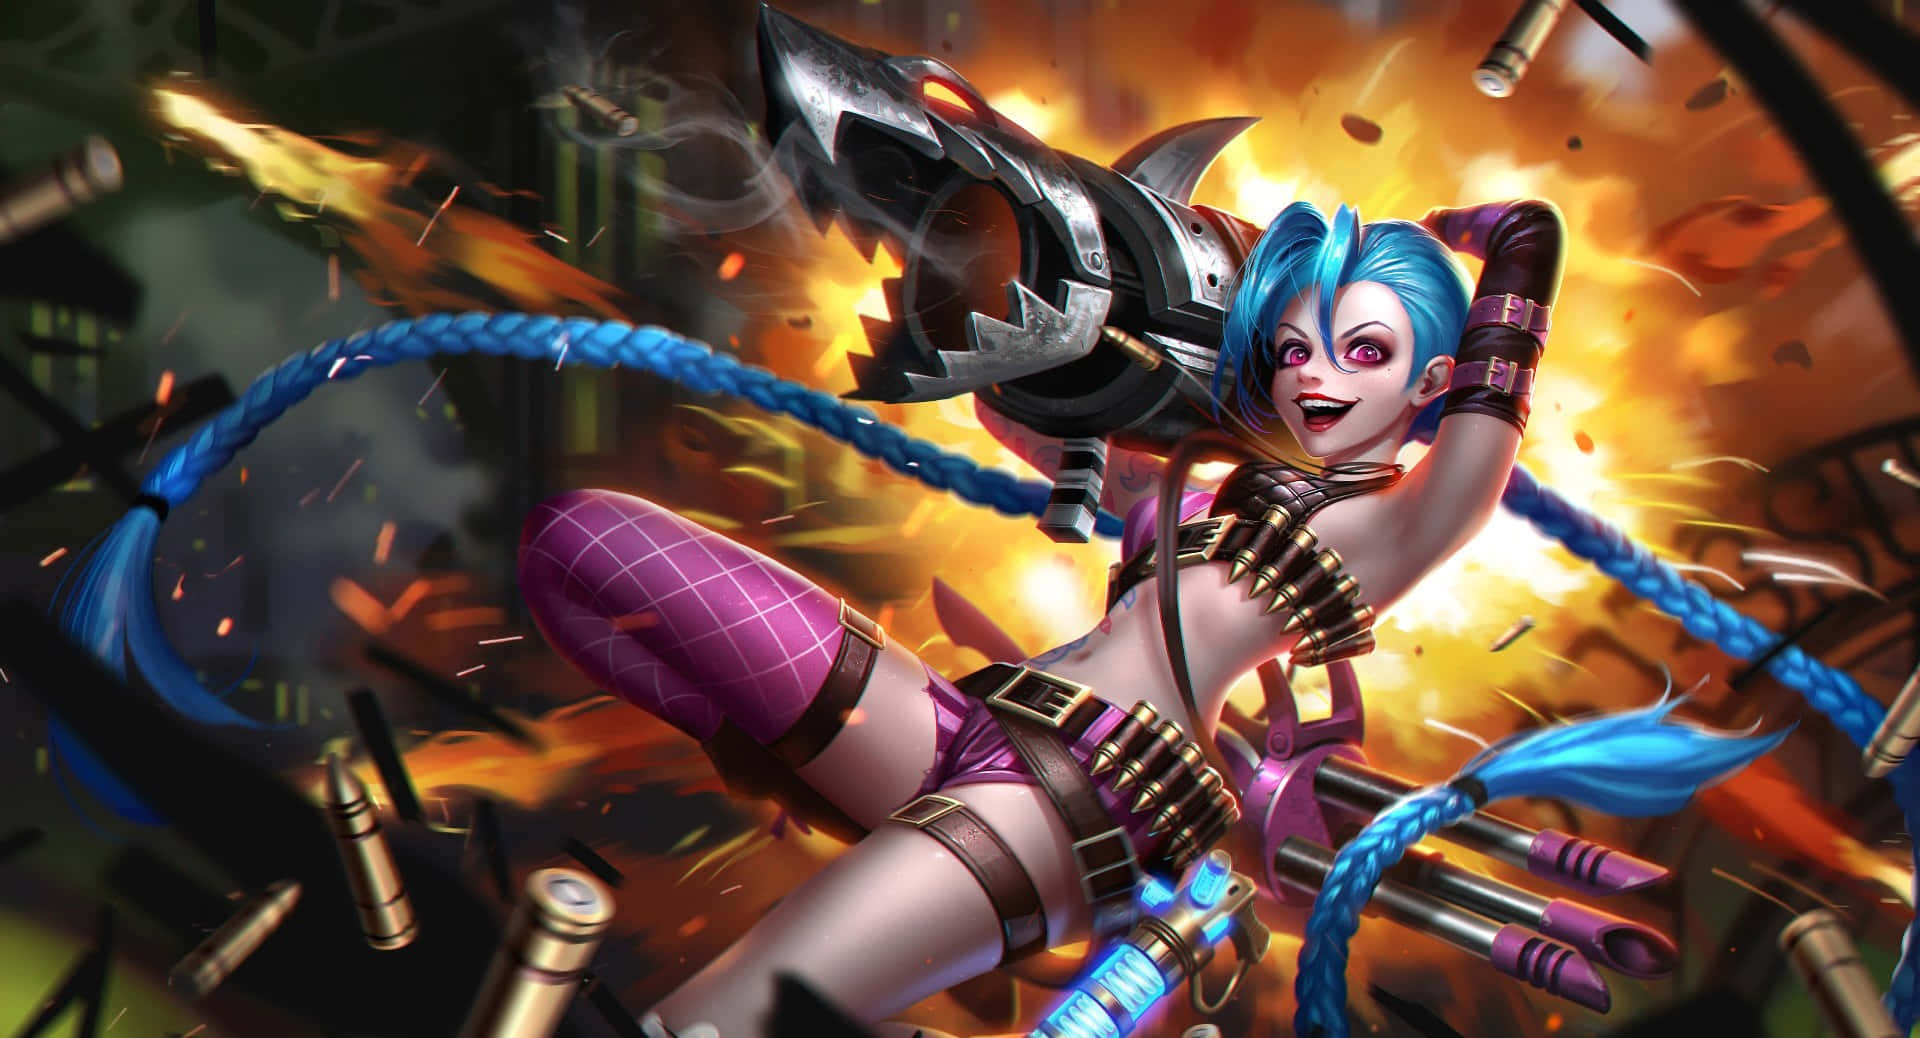 Jinx - Explosive Chaos and Mayhem in Action